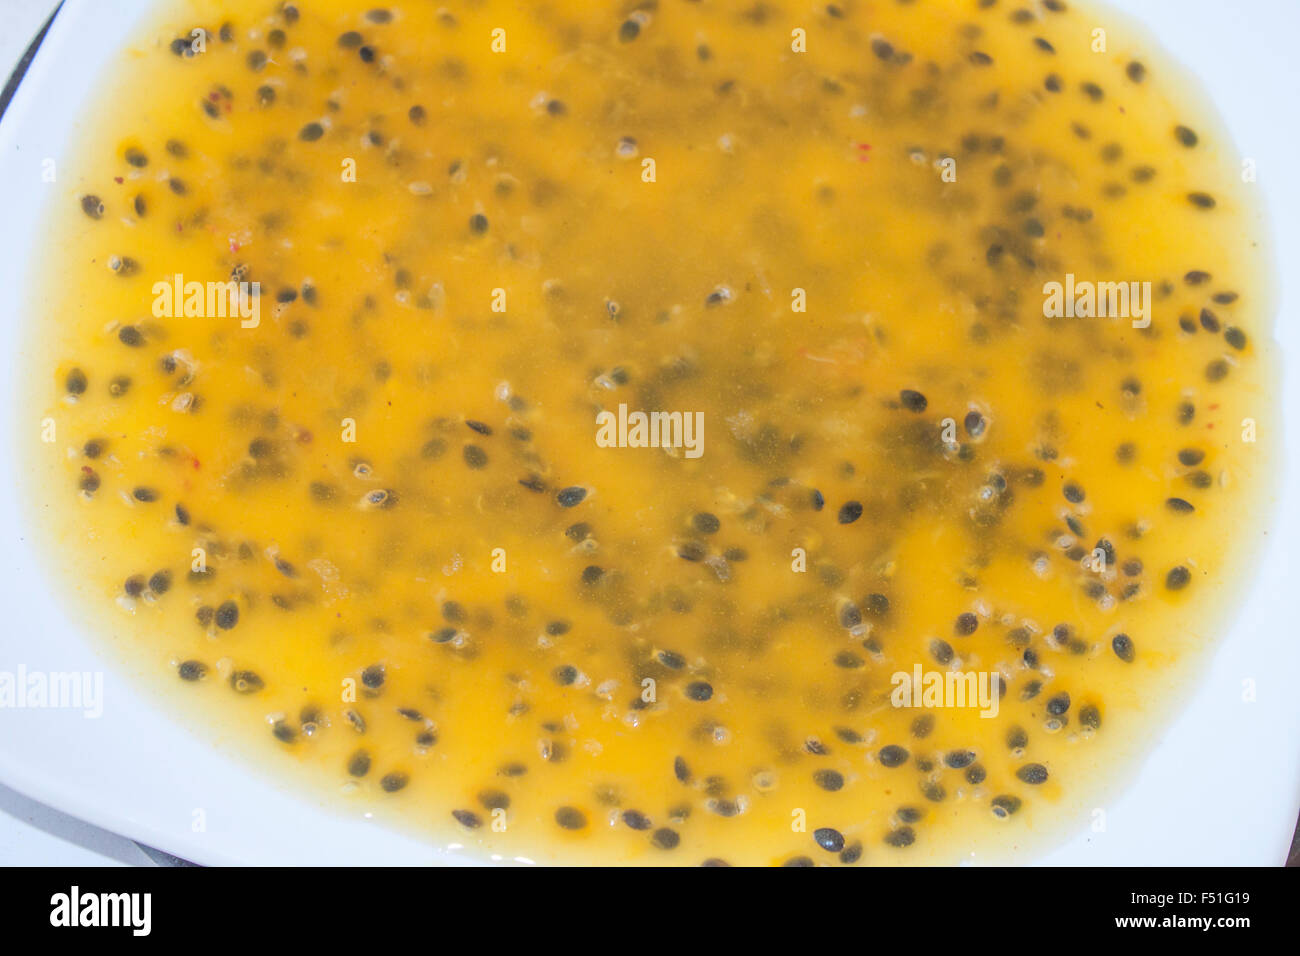 Tasty yellow passion sauce, on a white plate Stock Photo